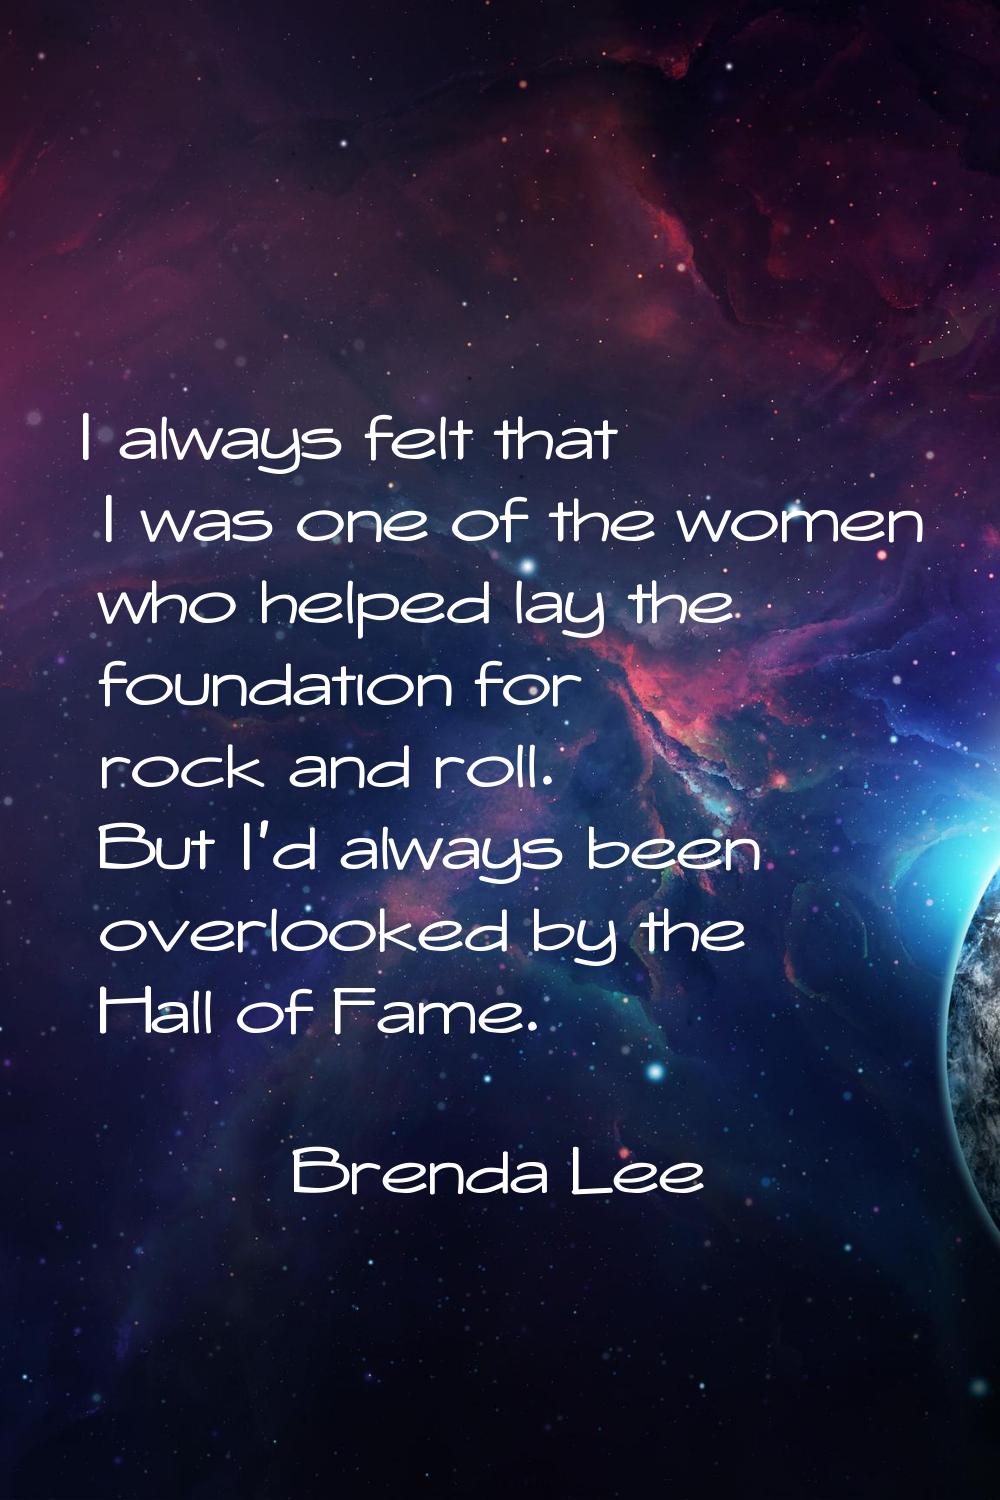 I always felt that I was one of the women who helped lay the foundation for rock and roll. But I'd 